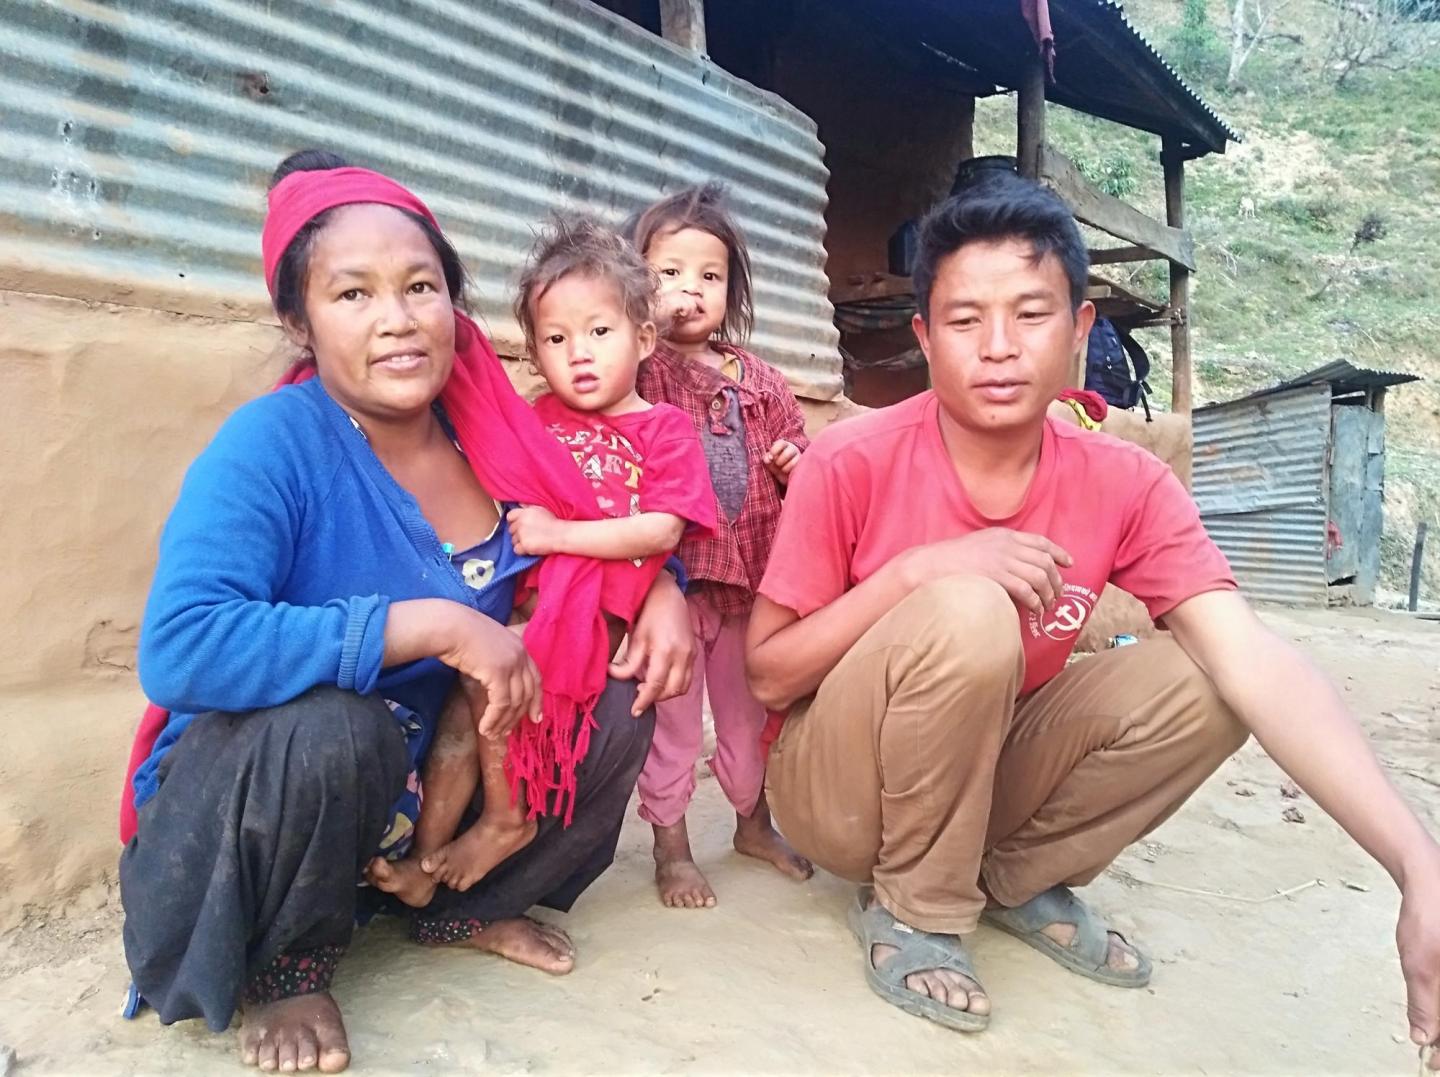 A Nepali family of four. The parents are squatting while the children stand in between them.